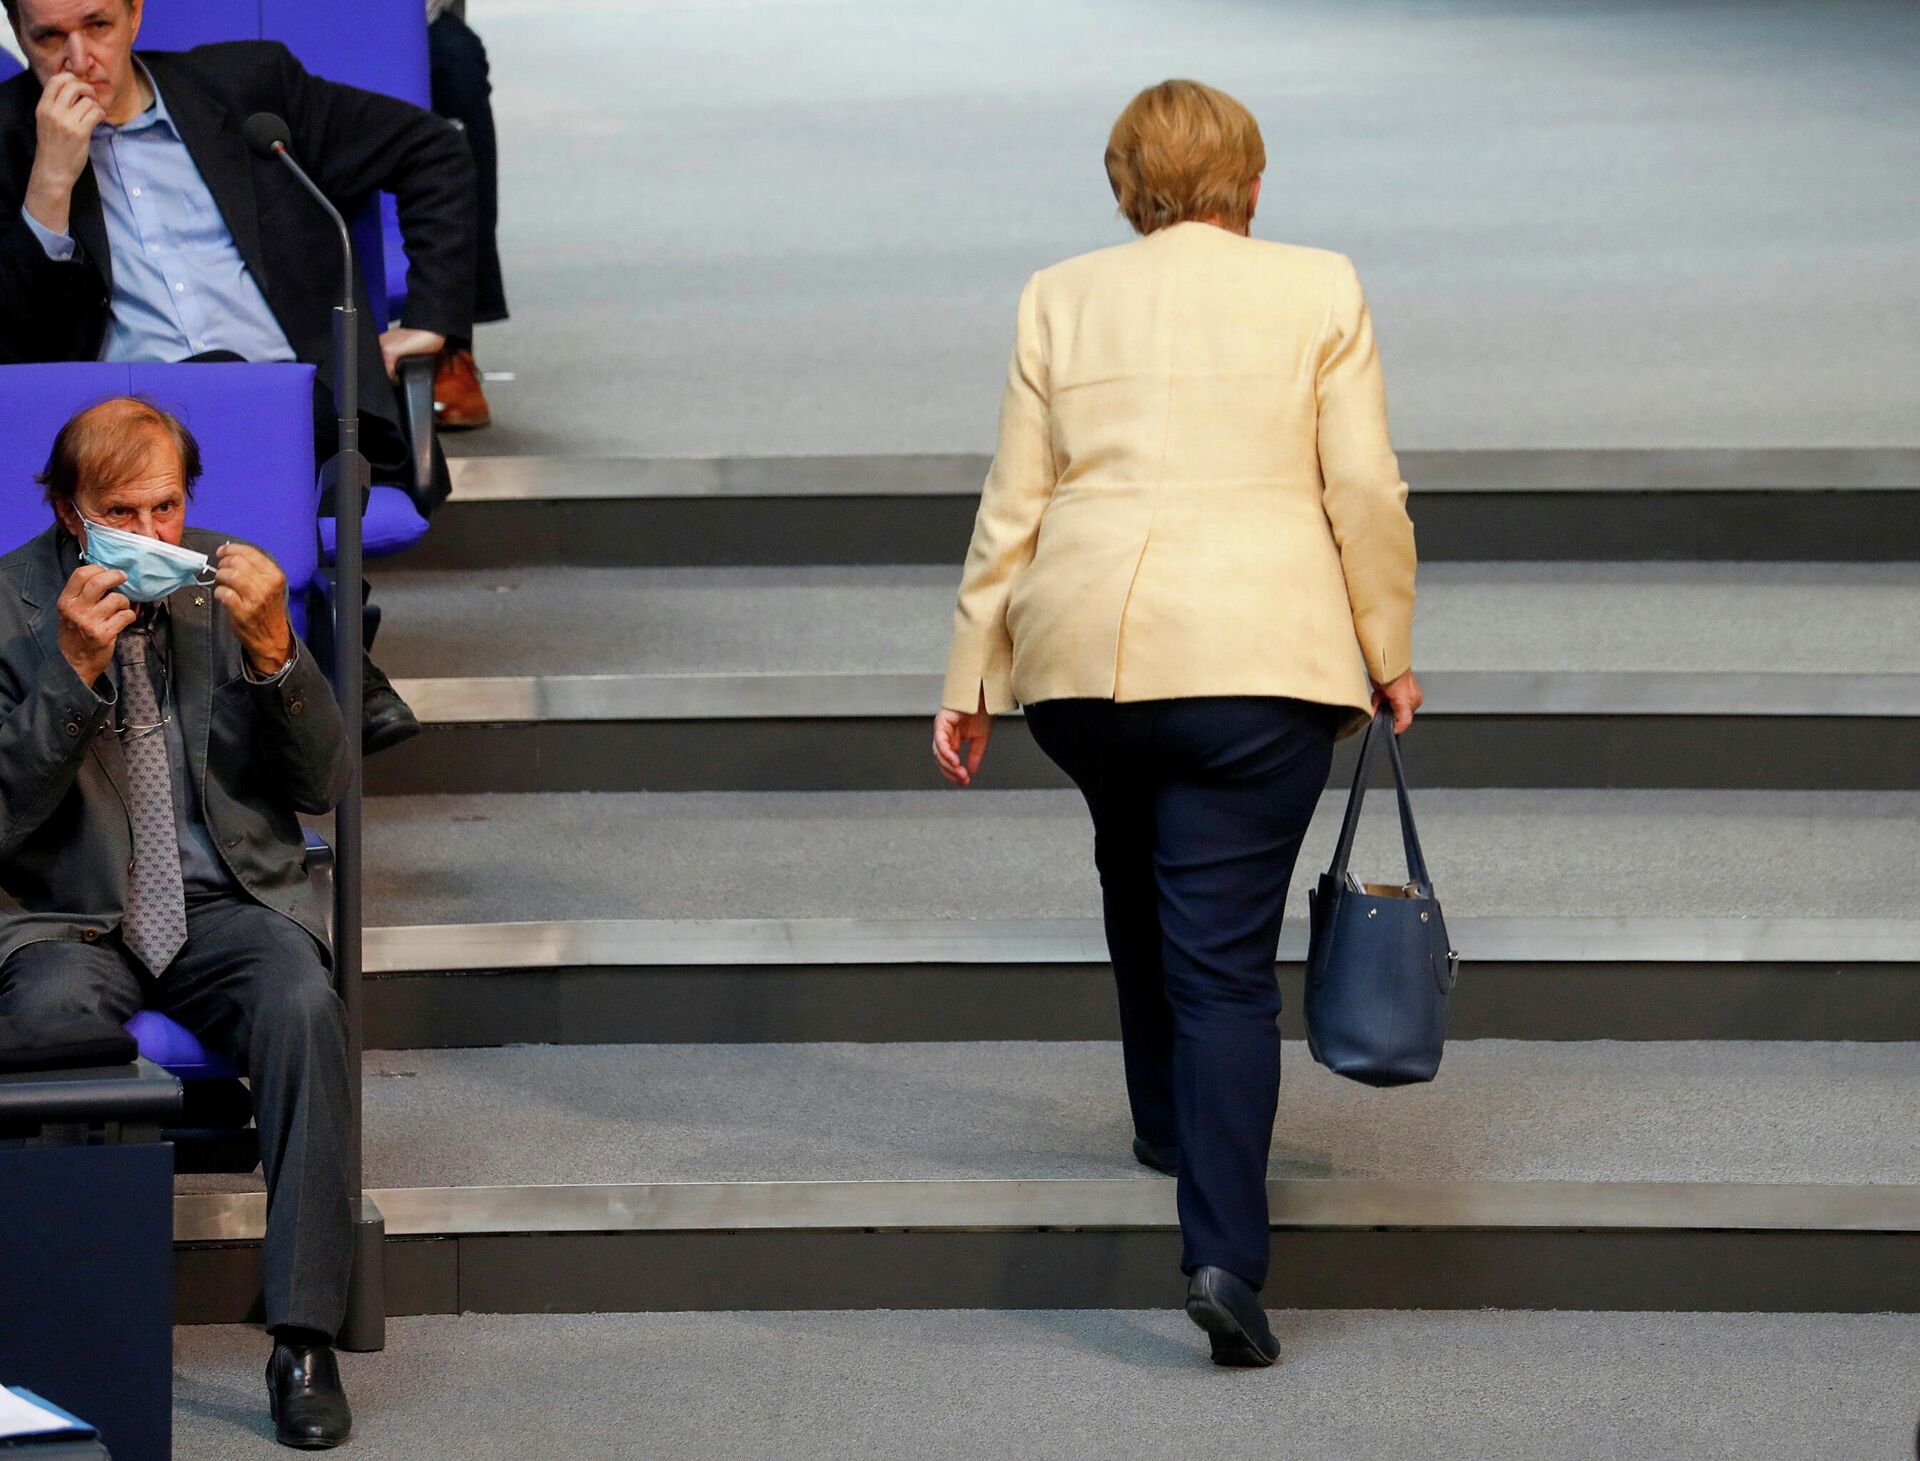 German Chancellor Angela Merkel leaves the plenary hall of the lower house of Parliament, or Bundestag, during one of the last sessions before the federal elections in Berlin, Germany, on 7 September 2021. - Sputnik International, 1920, 26.09.2021